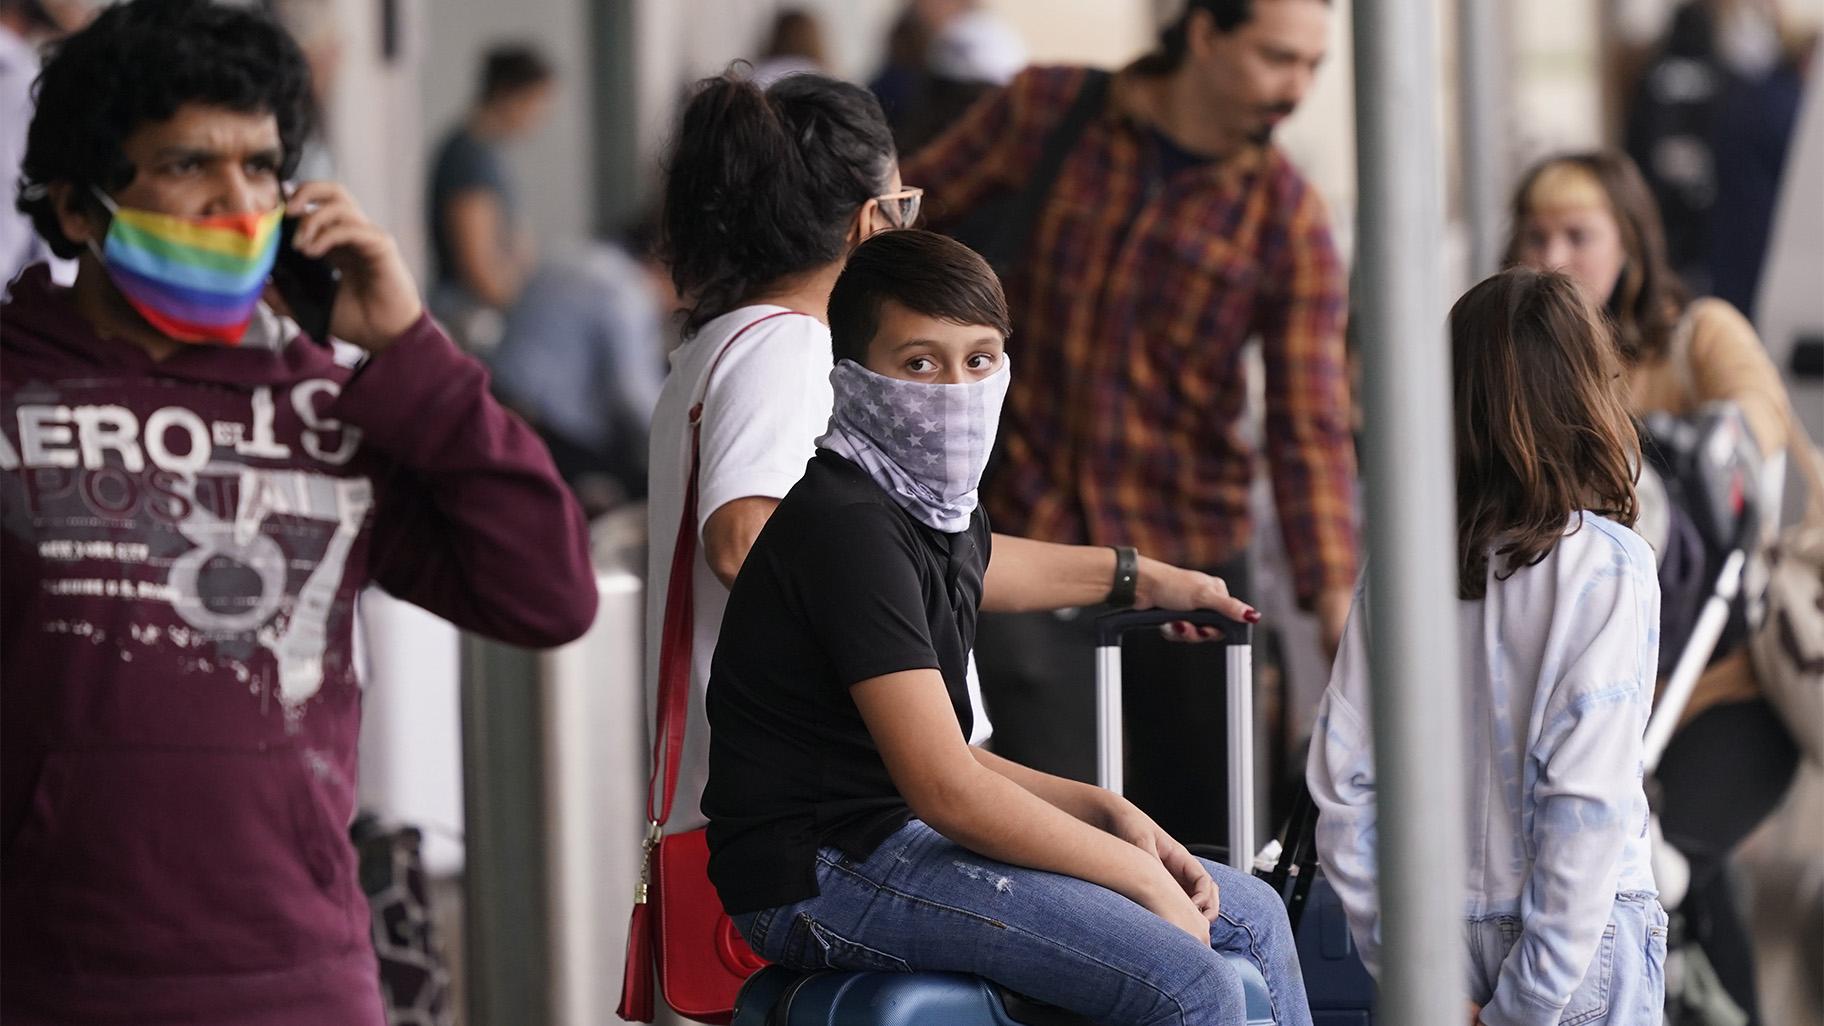 To prevent the spread of COVID-19, air travelers wear masks at Love Field in Dallas, Friday, Dec. 31, 2021. Flight cancellations surged again on the last day of 2021, with airlines blaming it on crew shortages related to the spike in COVID-19 infections. (AP Photo / LM Otero)